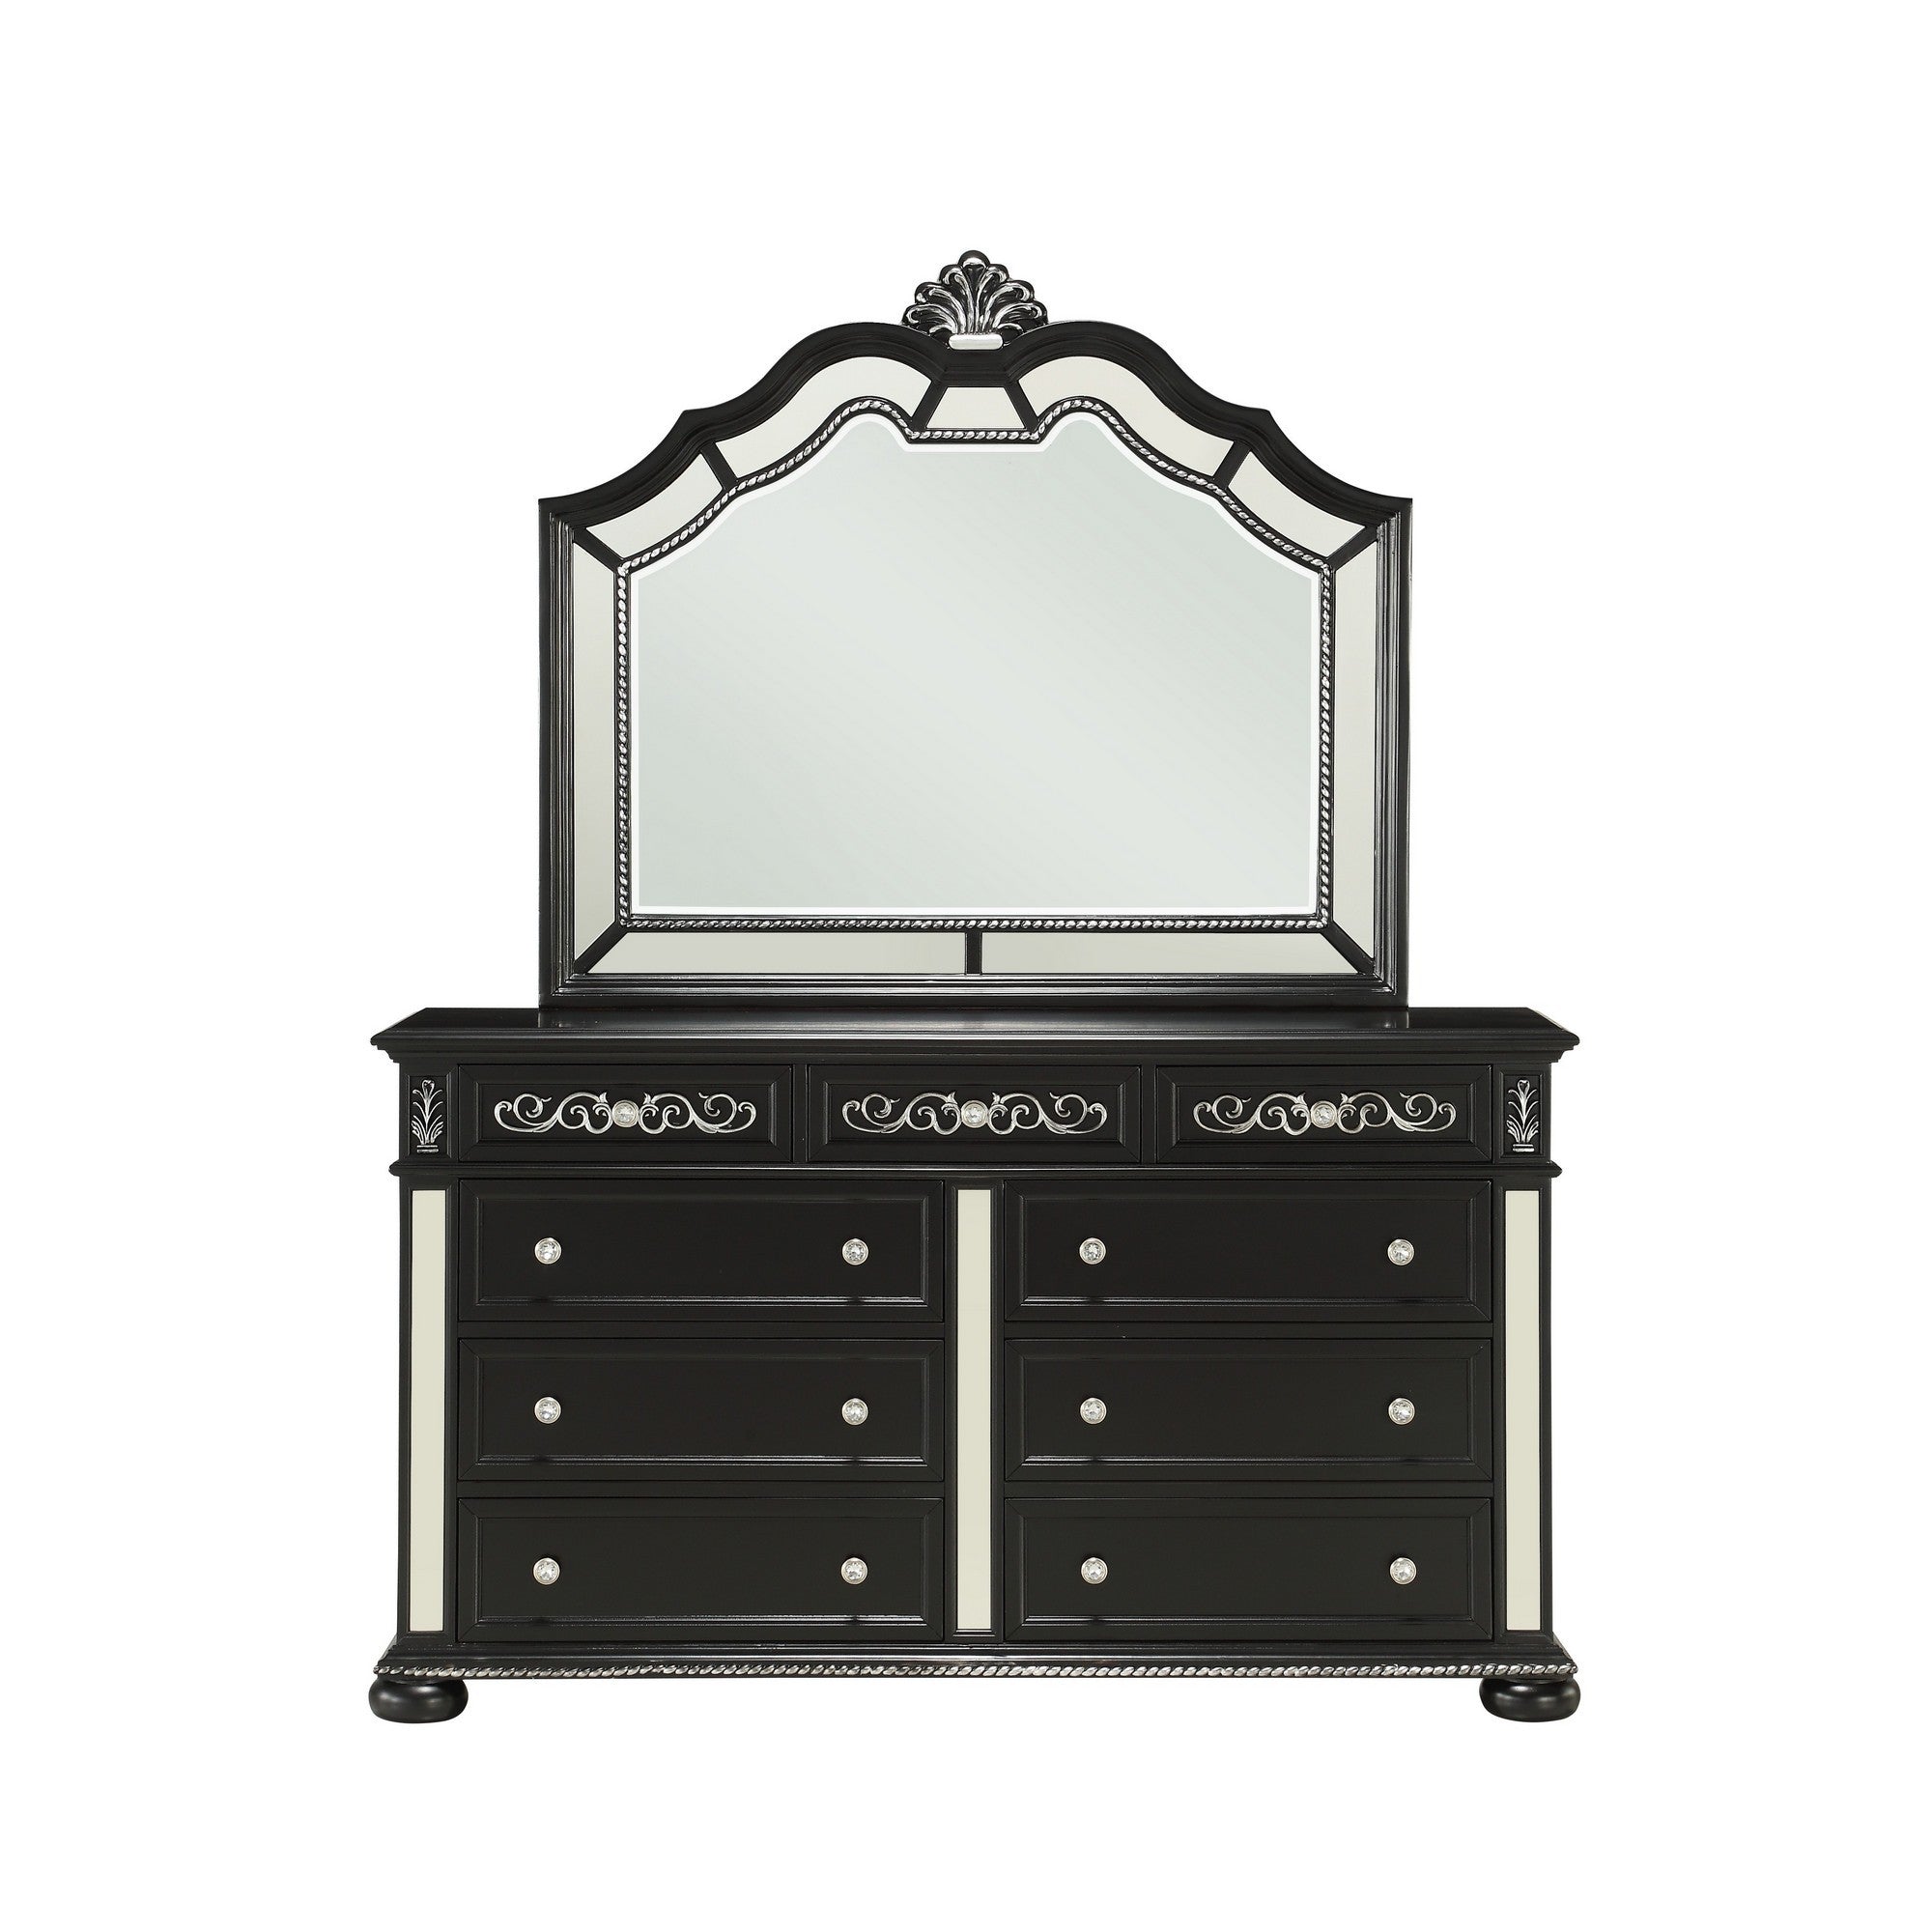 Black Jewel Heirloom Appearance Dresser with Intricate Carvings  Mirrored Accents  9 Drawer